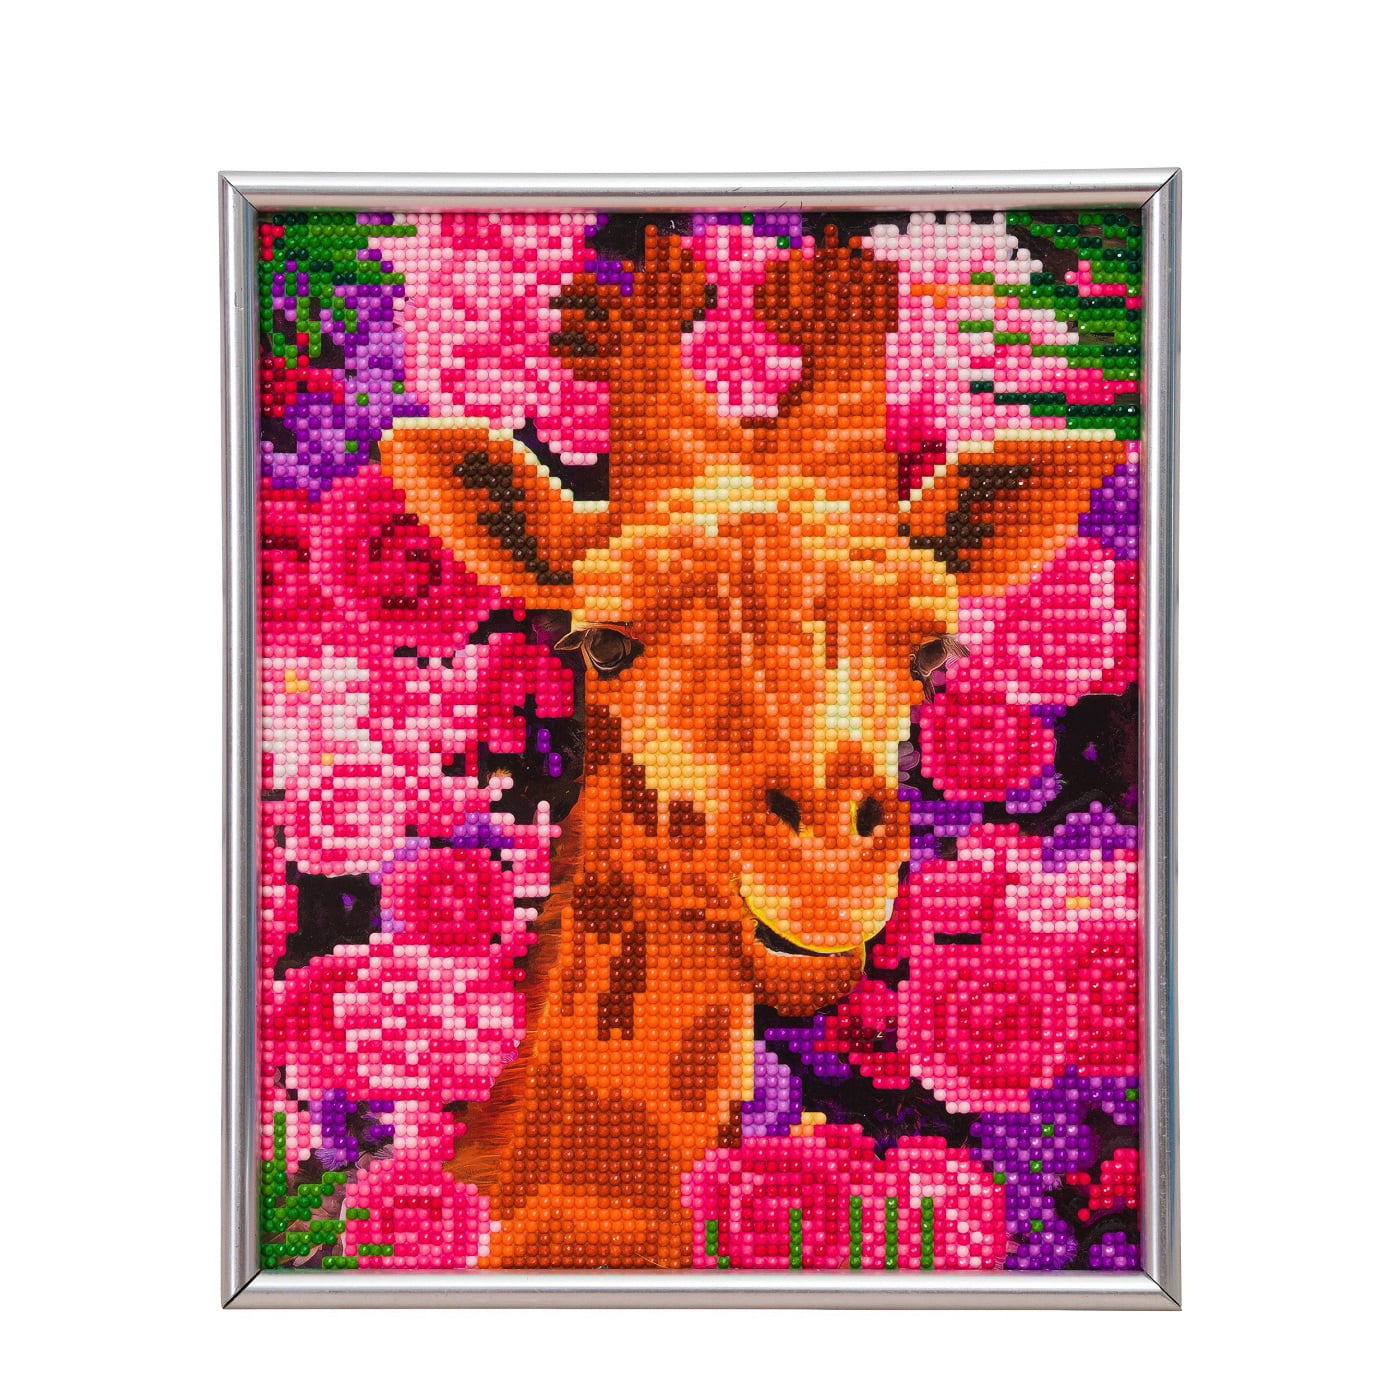 Craft Buddy Crystal Art / Diamond Painting Framed Picture Kit - Giraffe &  Flowers - Partial Crystal